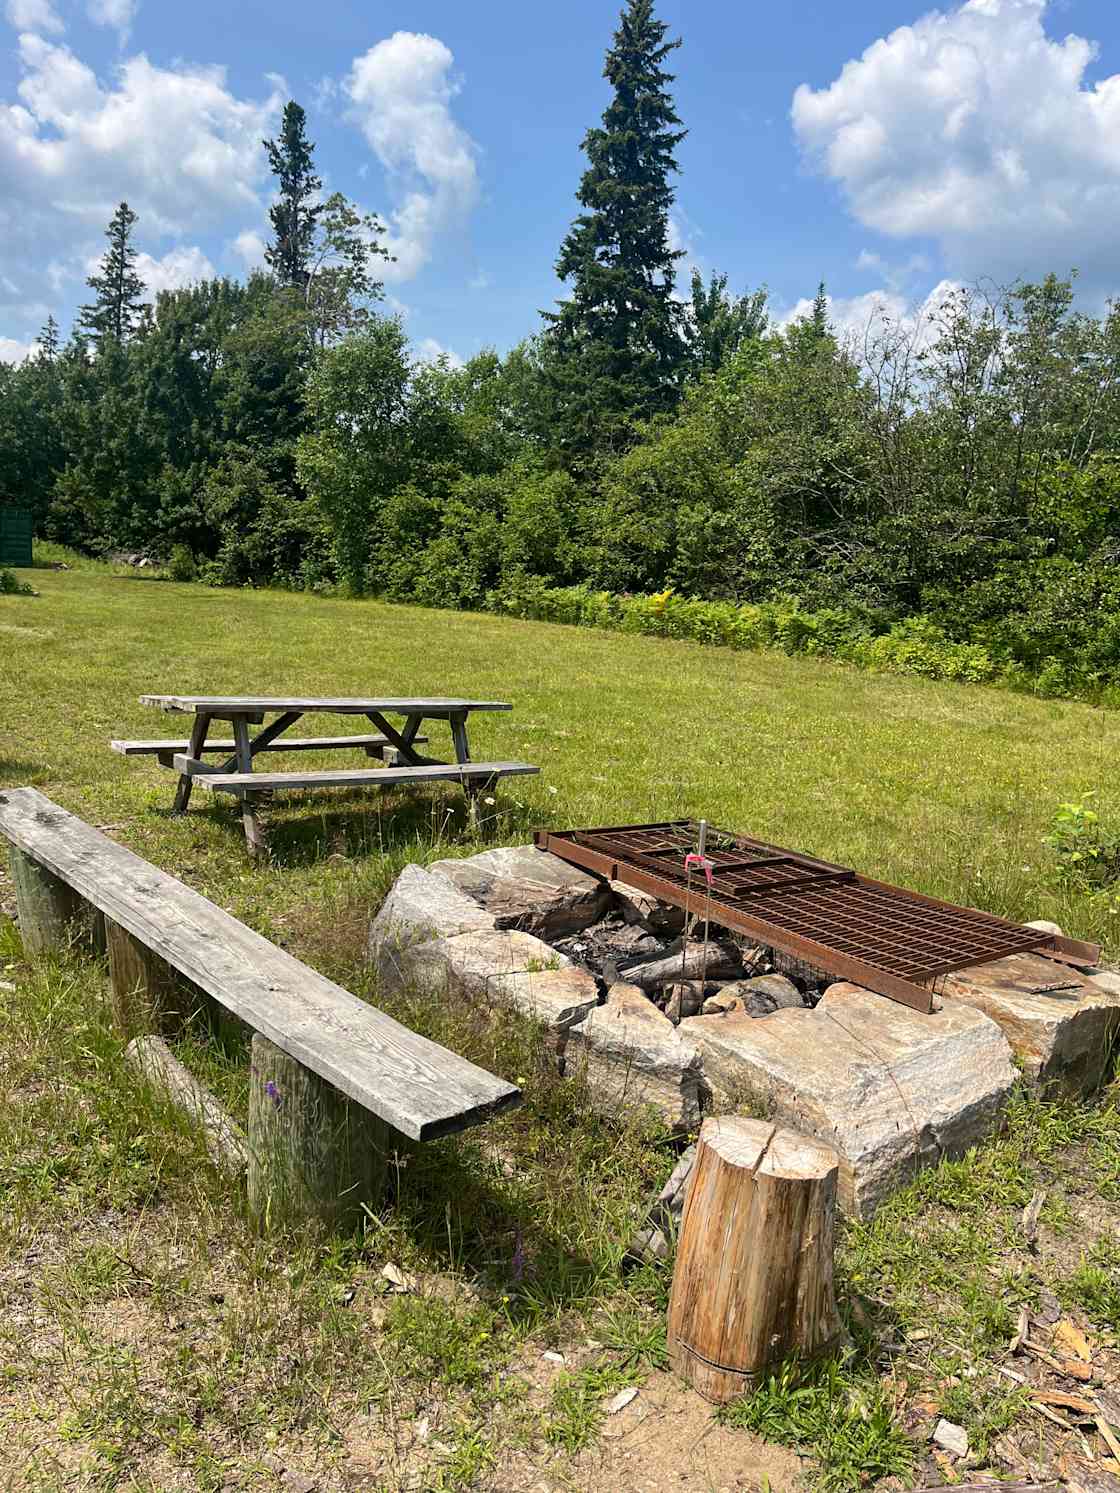 Large firepit and cooking grate available for campers to use.